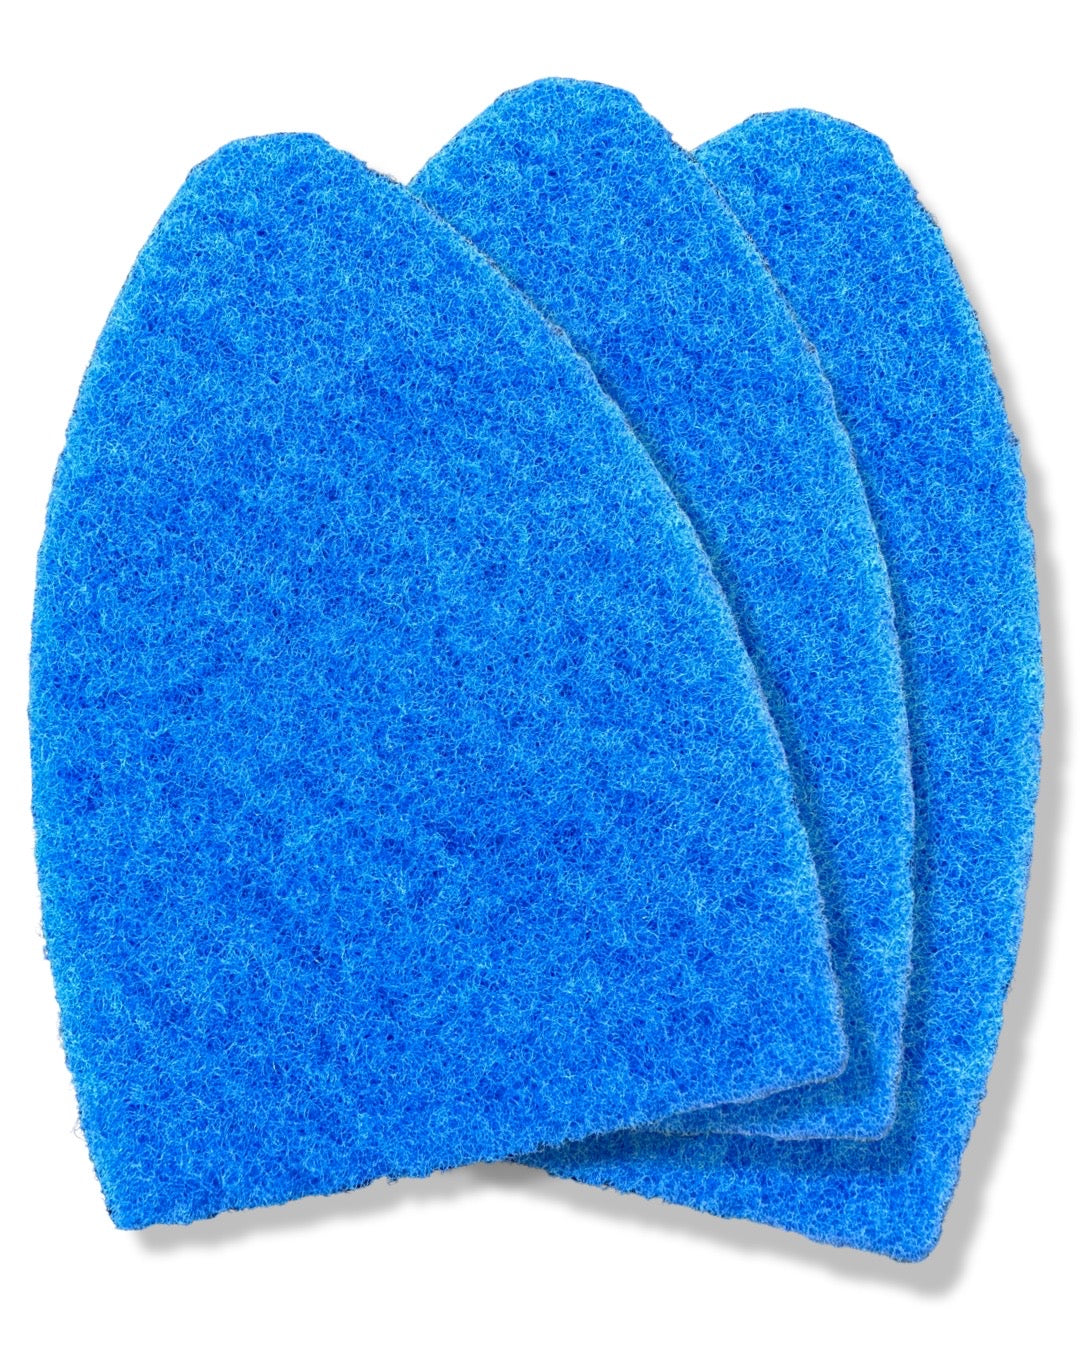 Scrub It Replacement Pads (3 Pack)